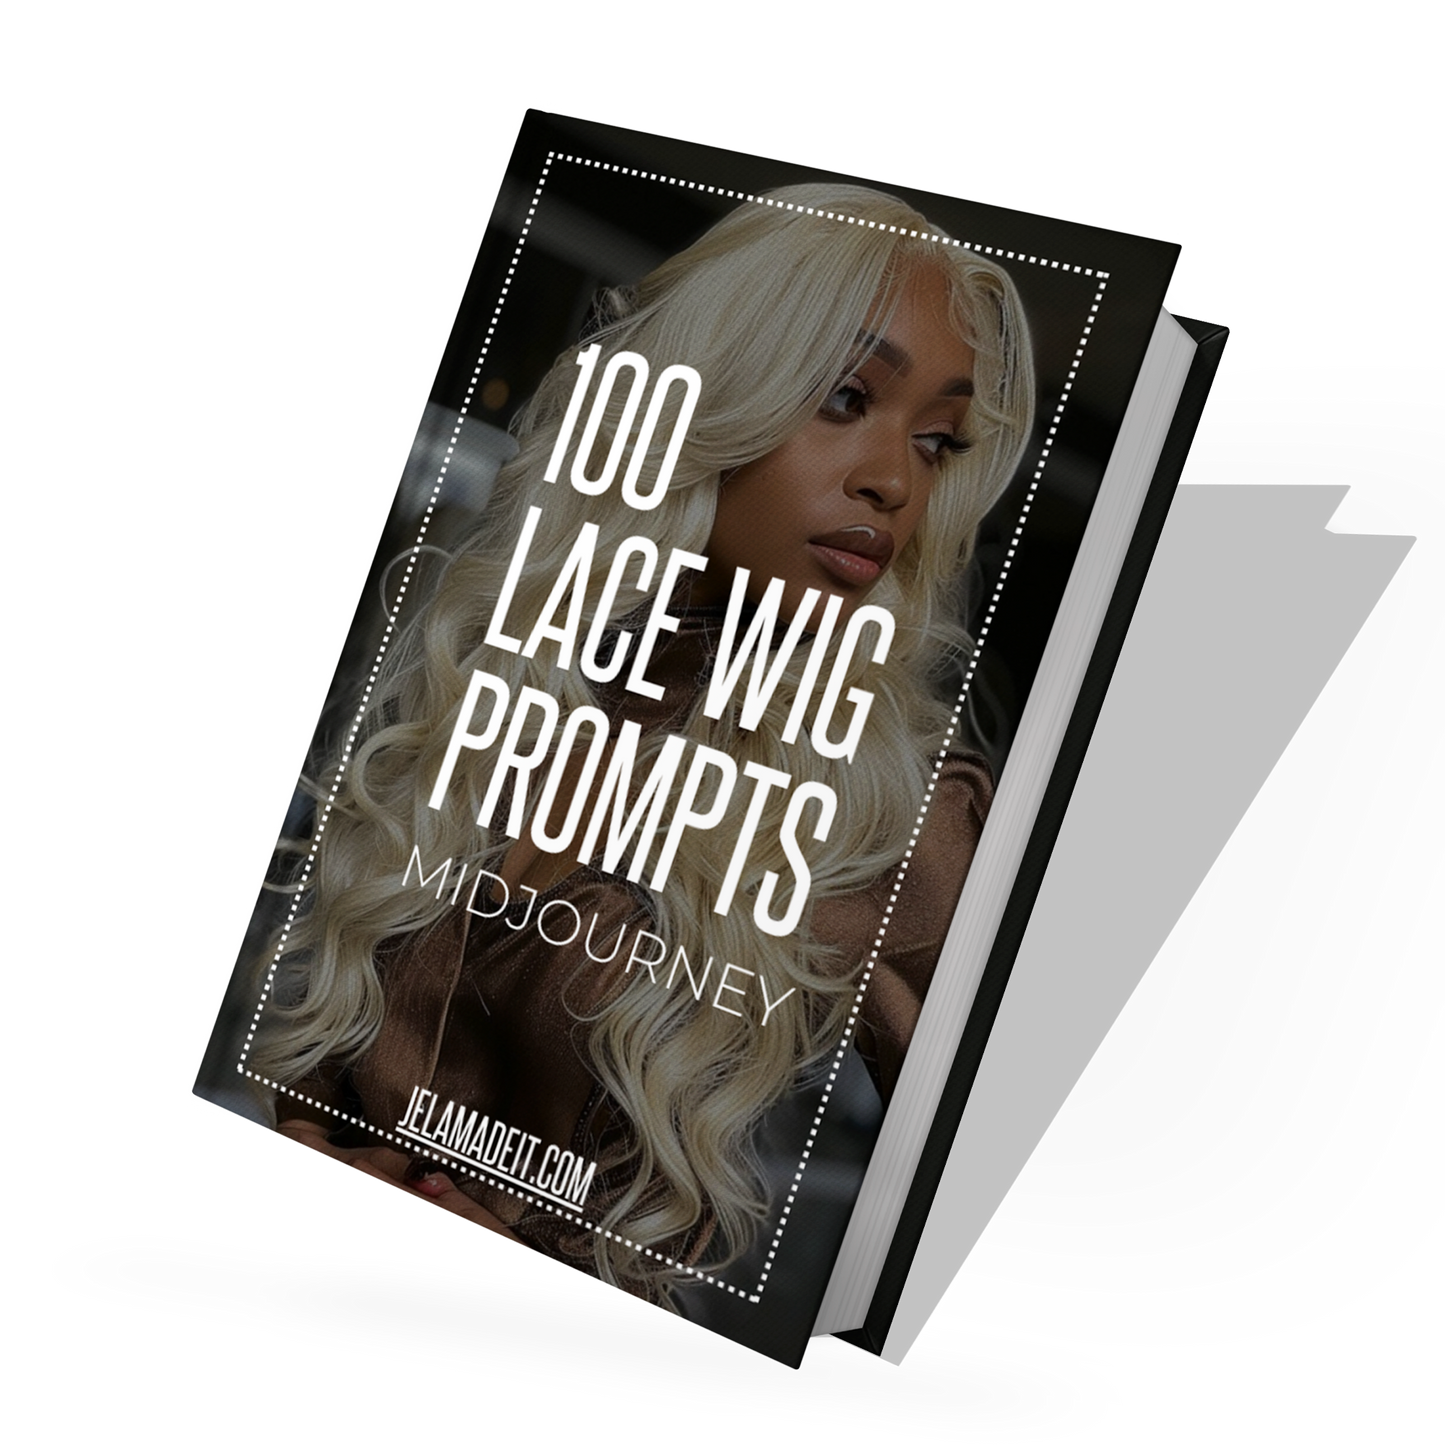 100 Lace Wig Prompts for Midjourney